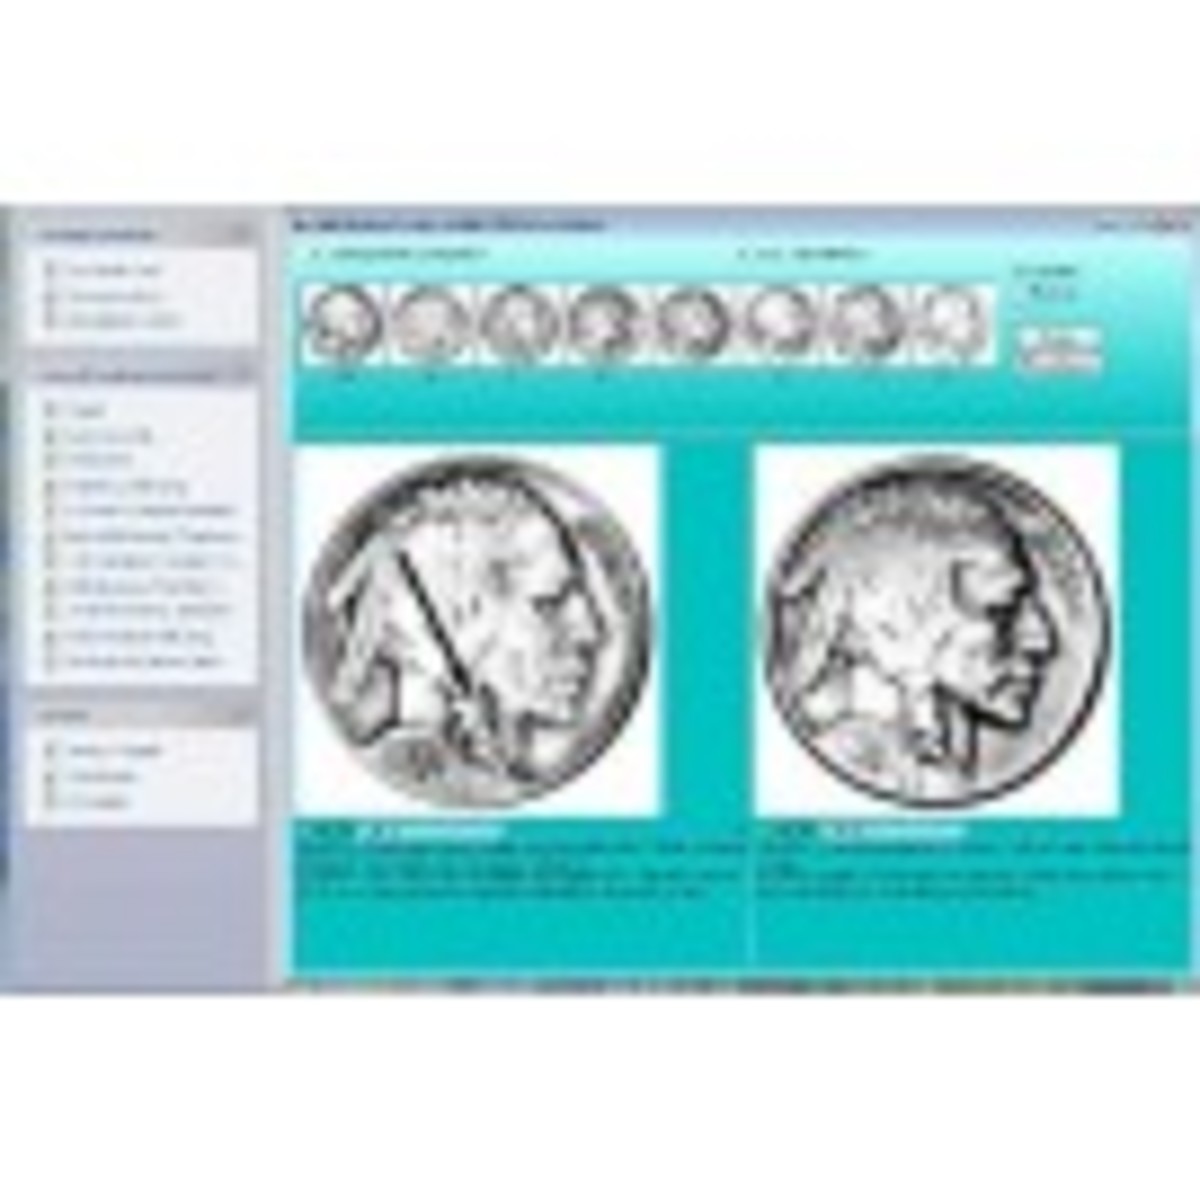 Over 1,000 images covering US coins from 1793-present for grades from AG to Unc!